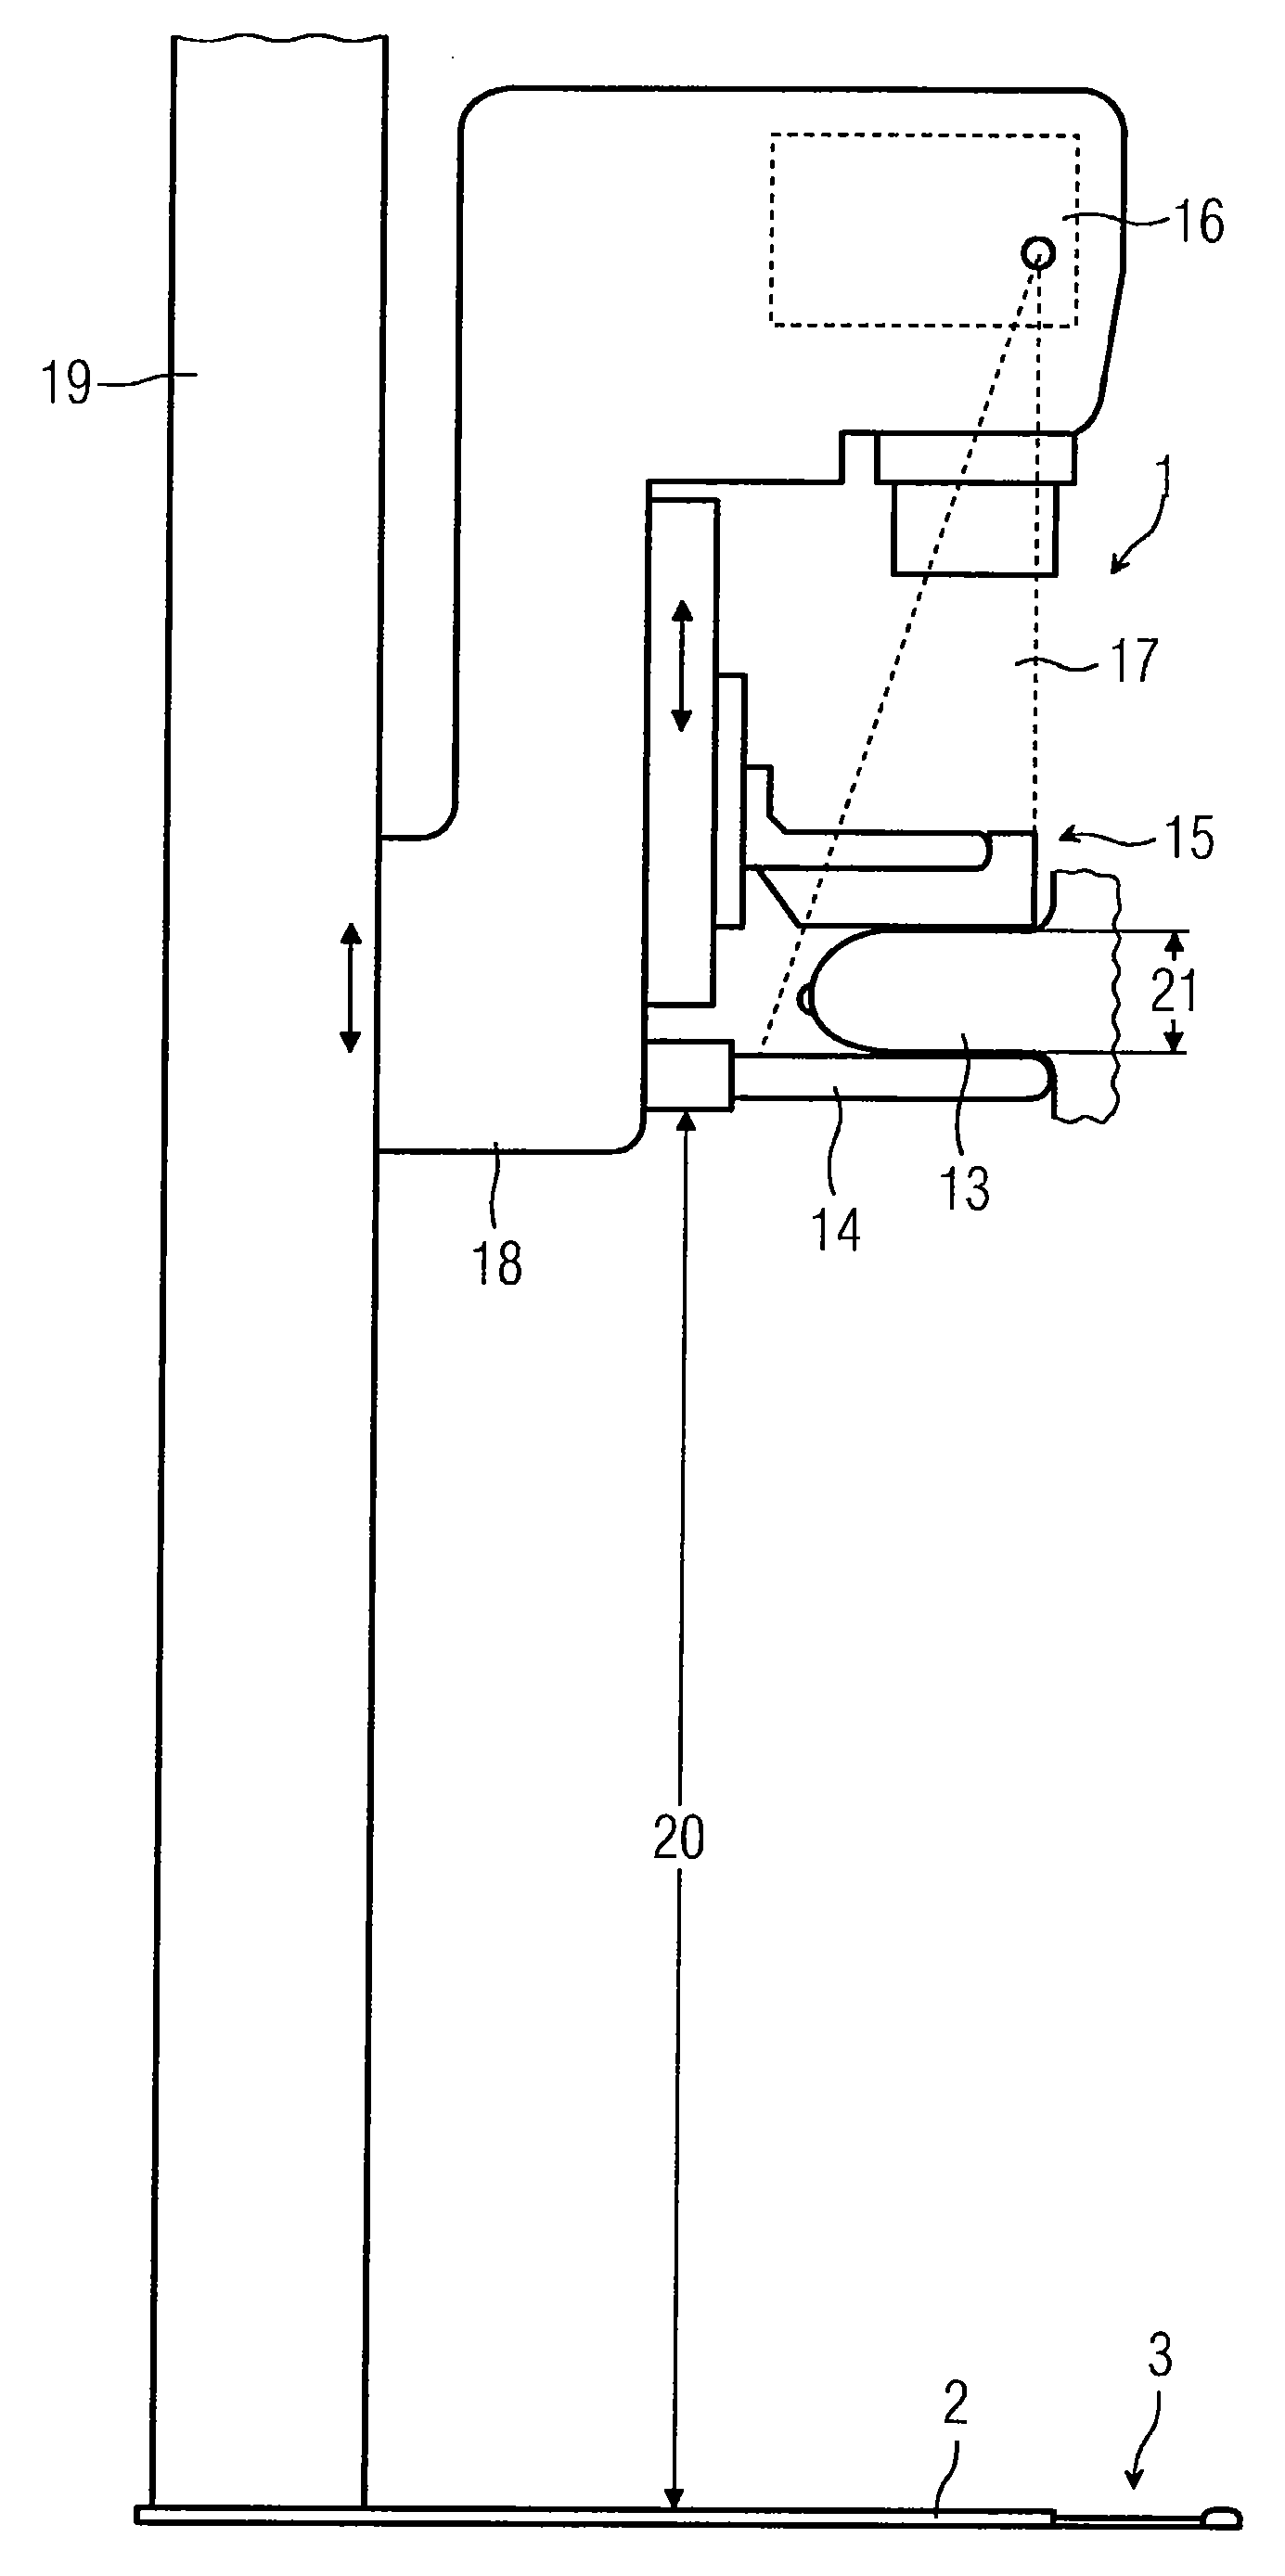 User control device for controlling a medical system